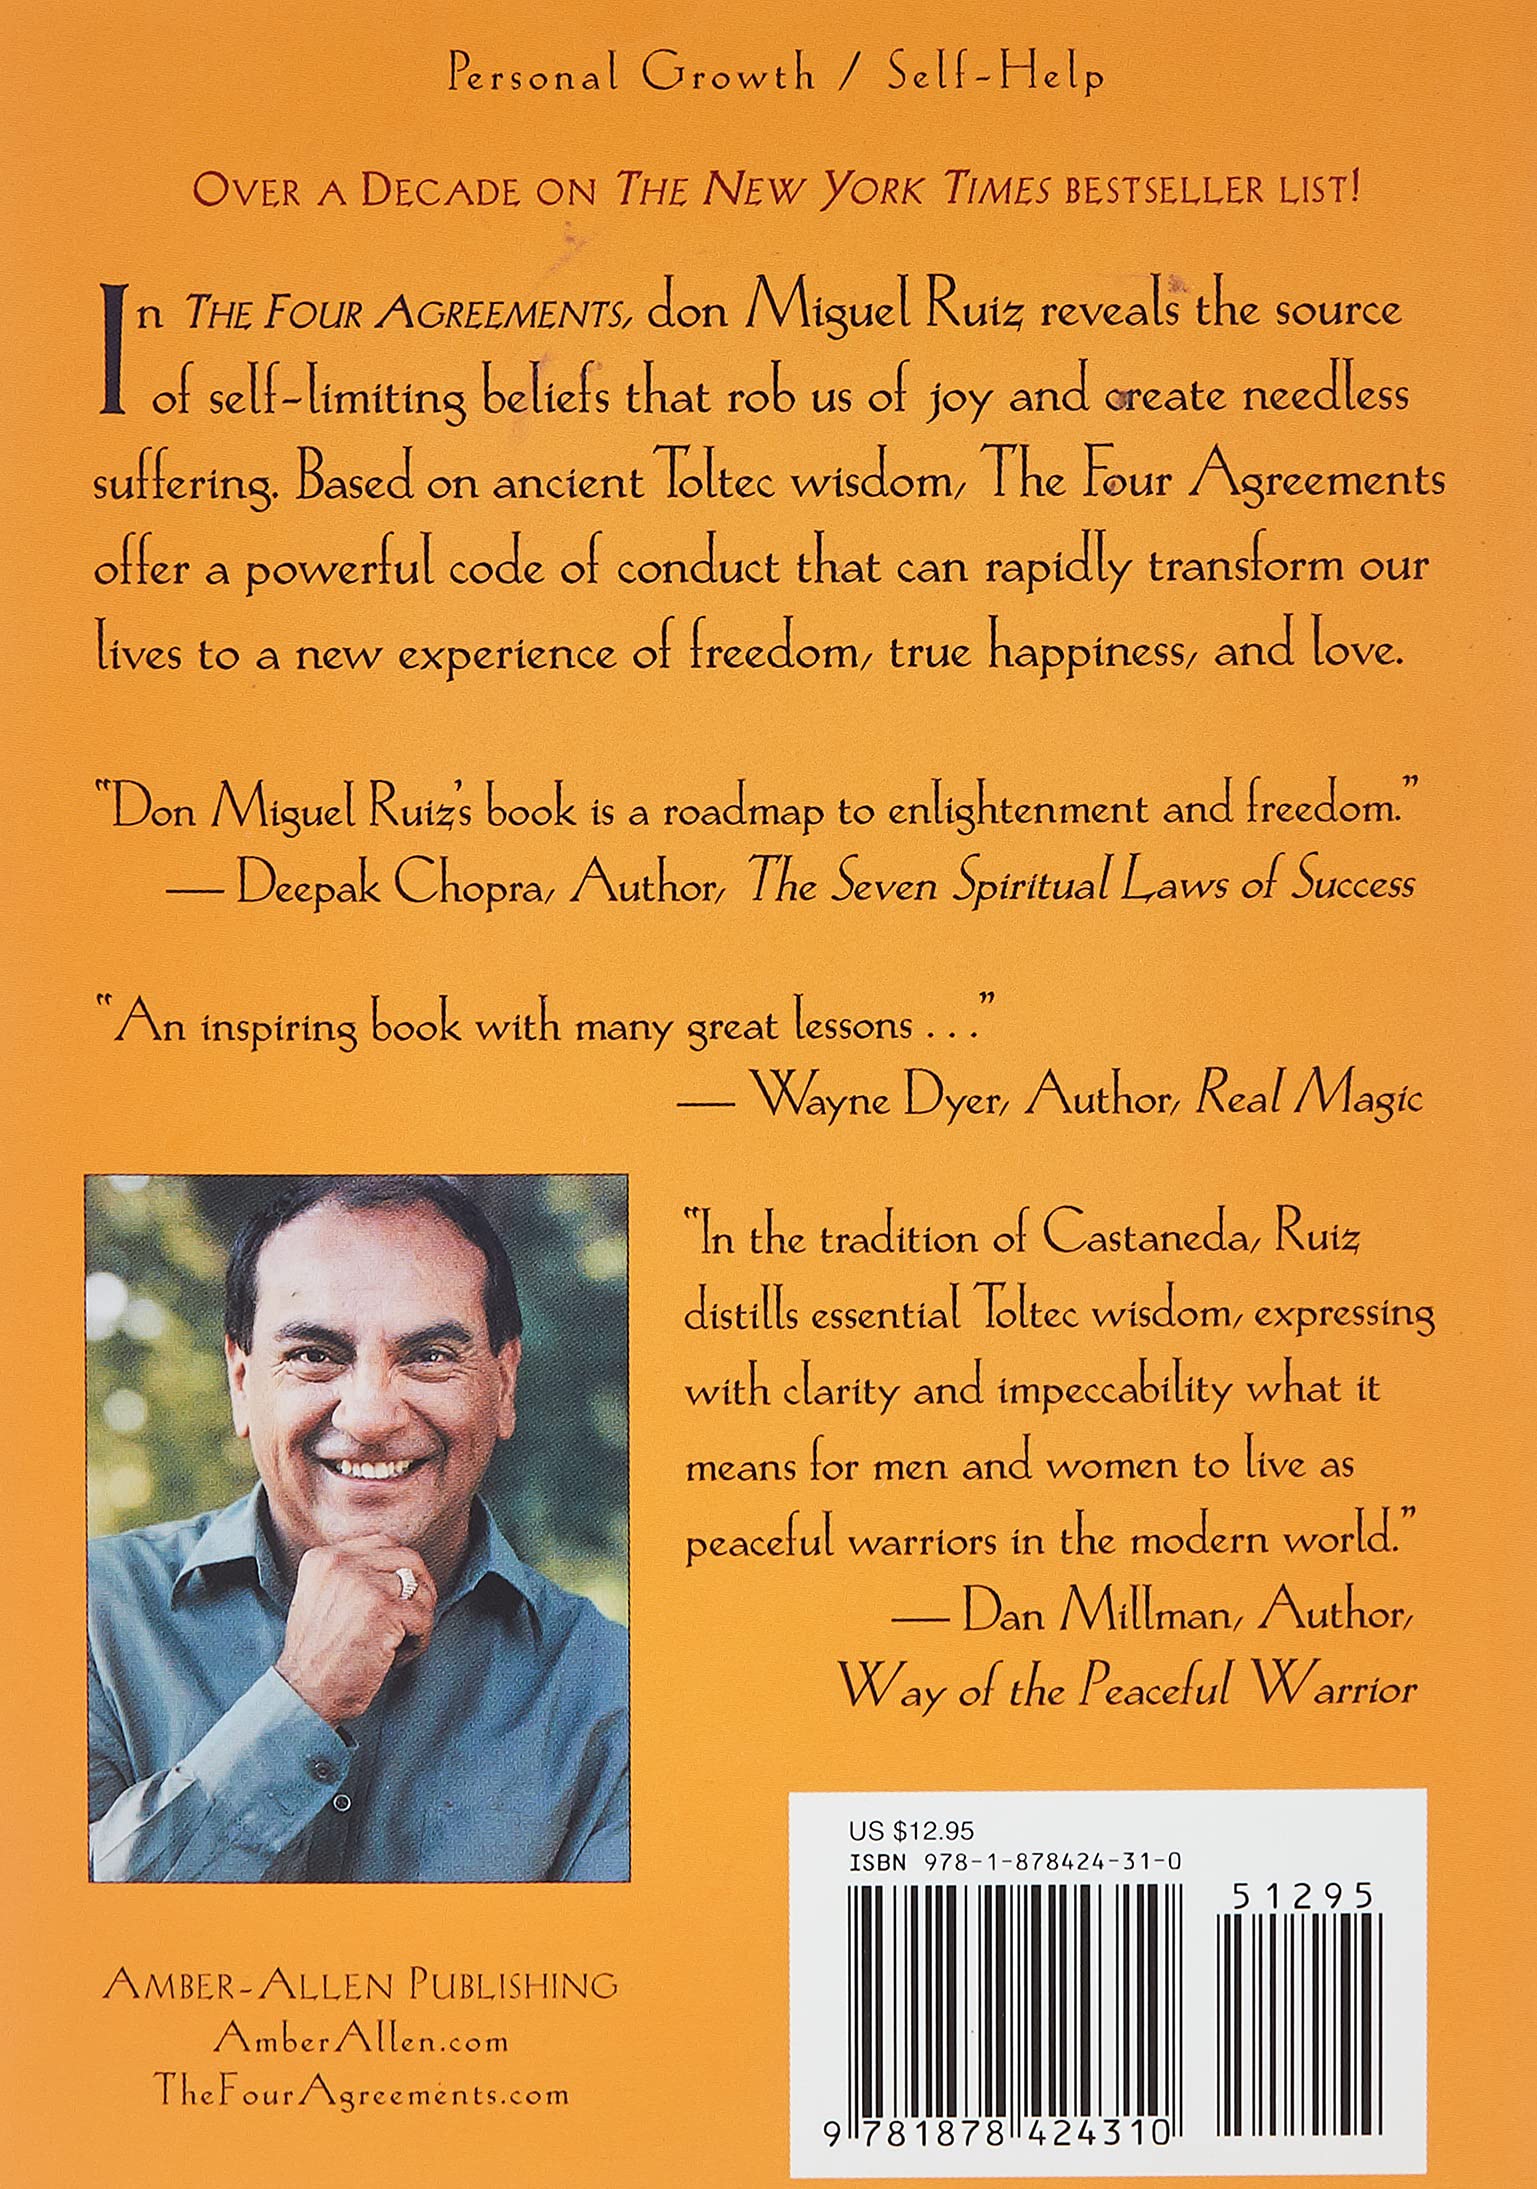 The Four Agreements: A Practical Guide to Personal Freedom (Don Miguel Ruiz)